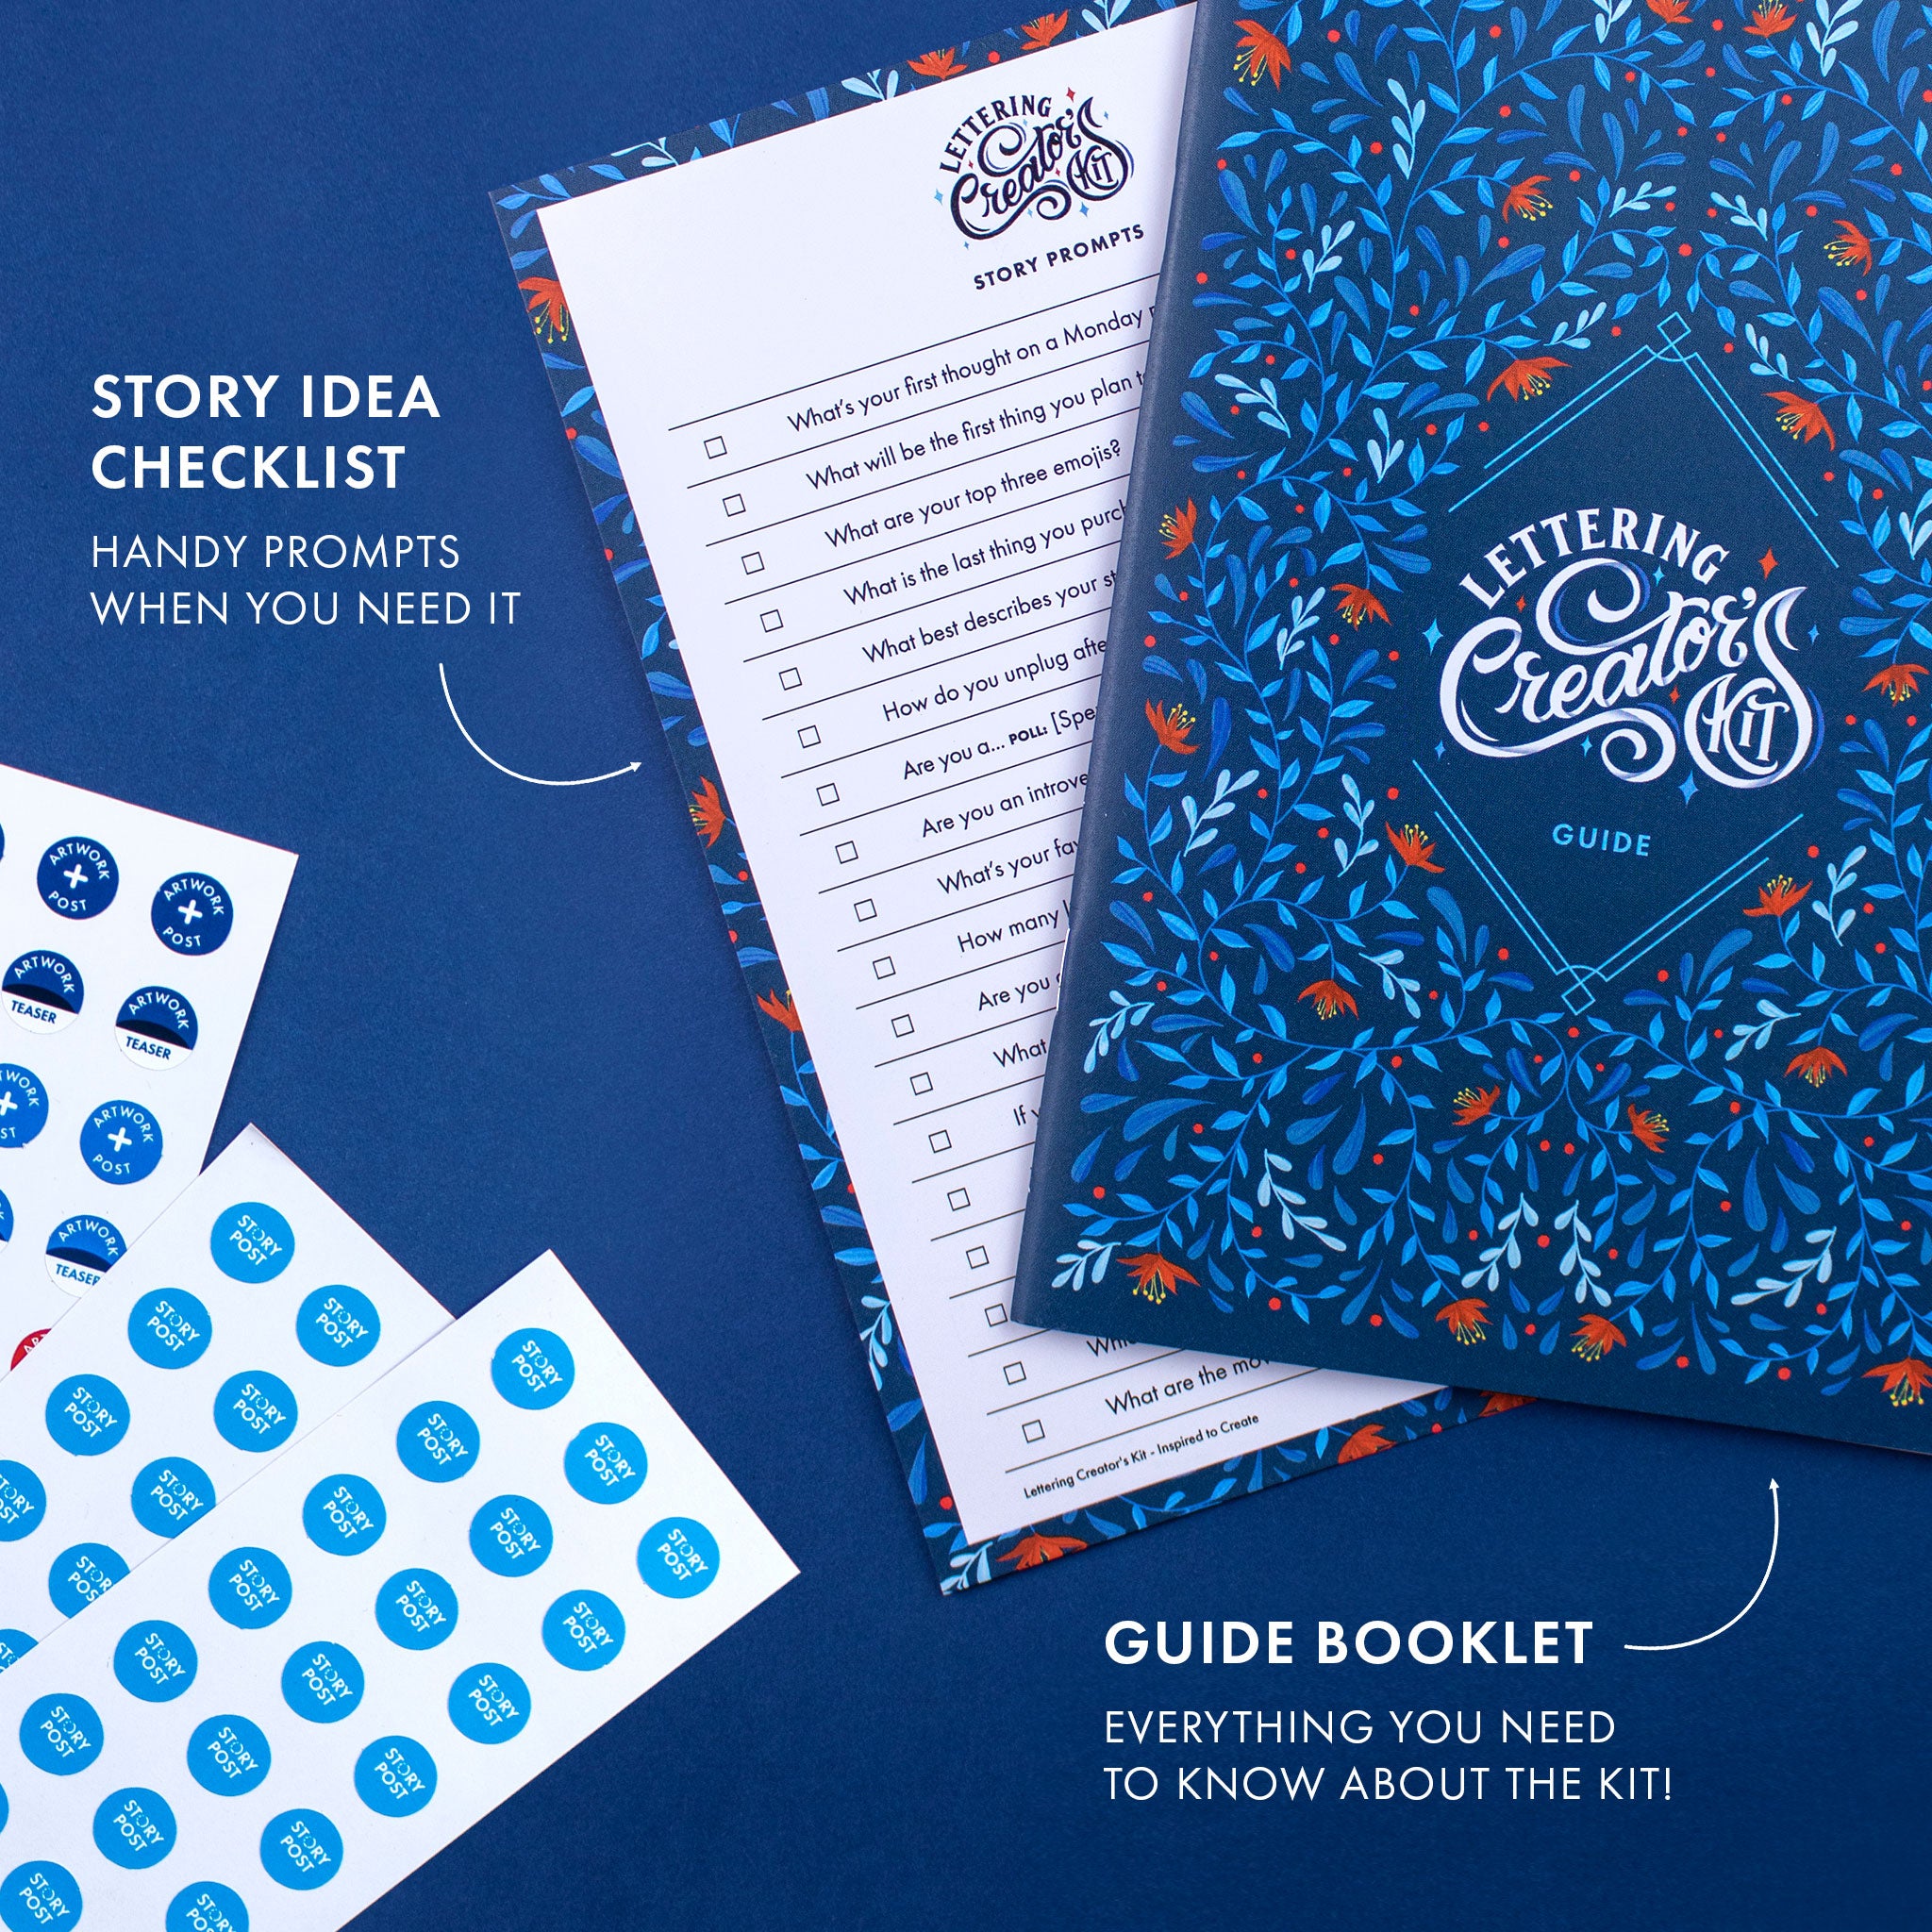 Lettering Creator's Kit: Inspired to Create